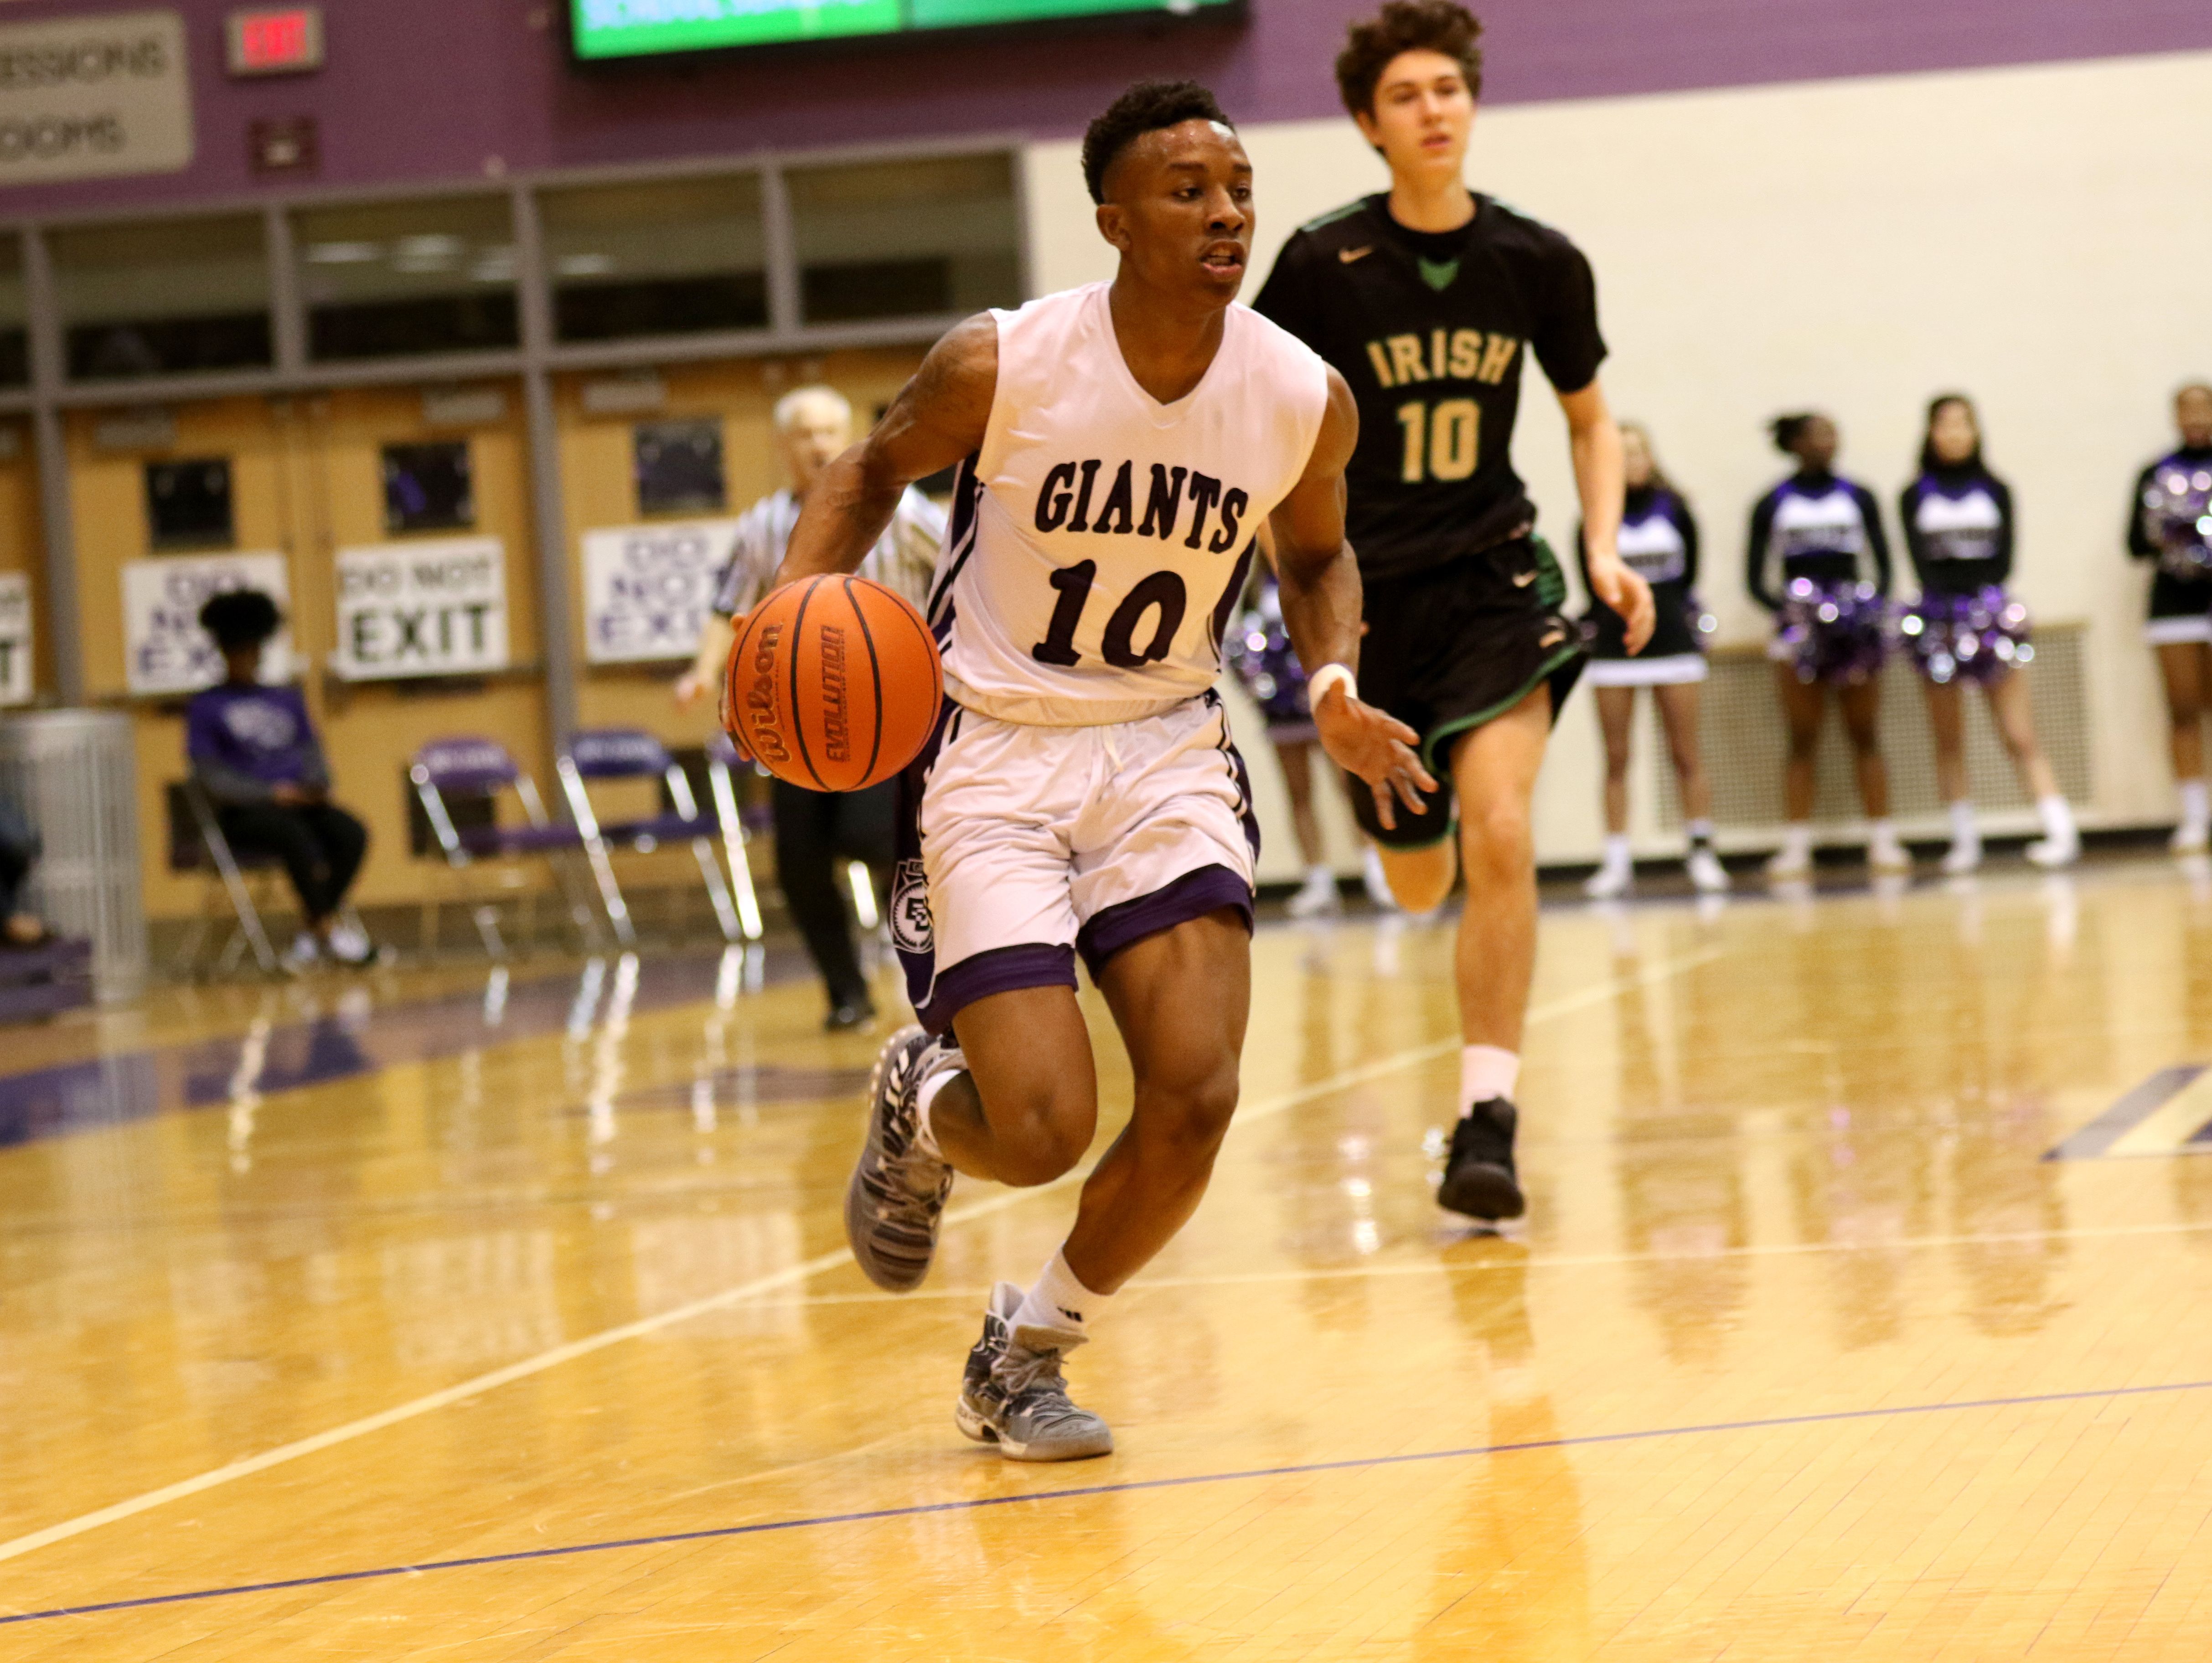 Datrion Harper drives toward the hoop in Ben Davis' heavy win over Cathedral on Friday.